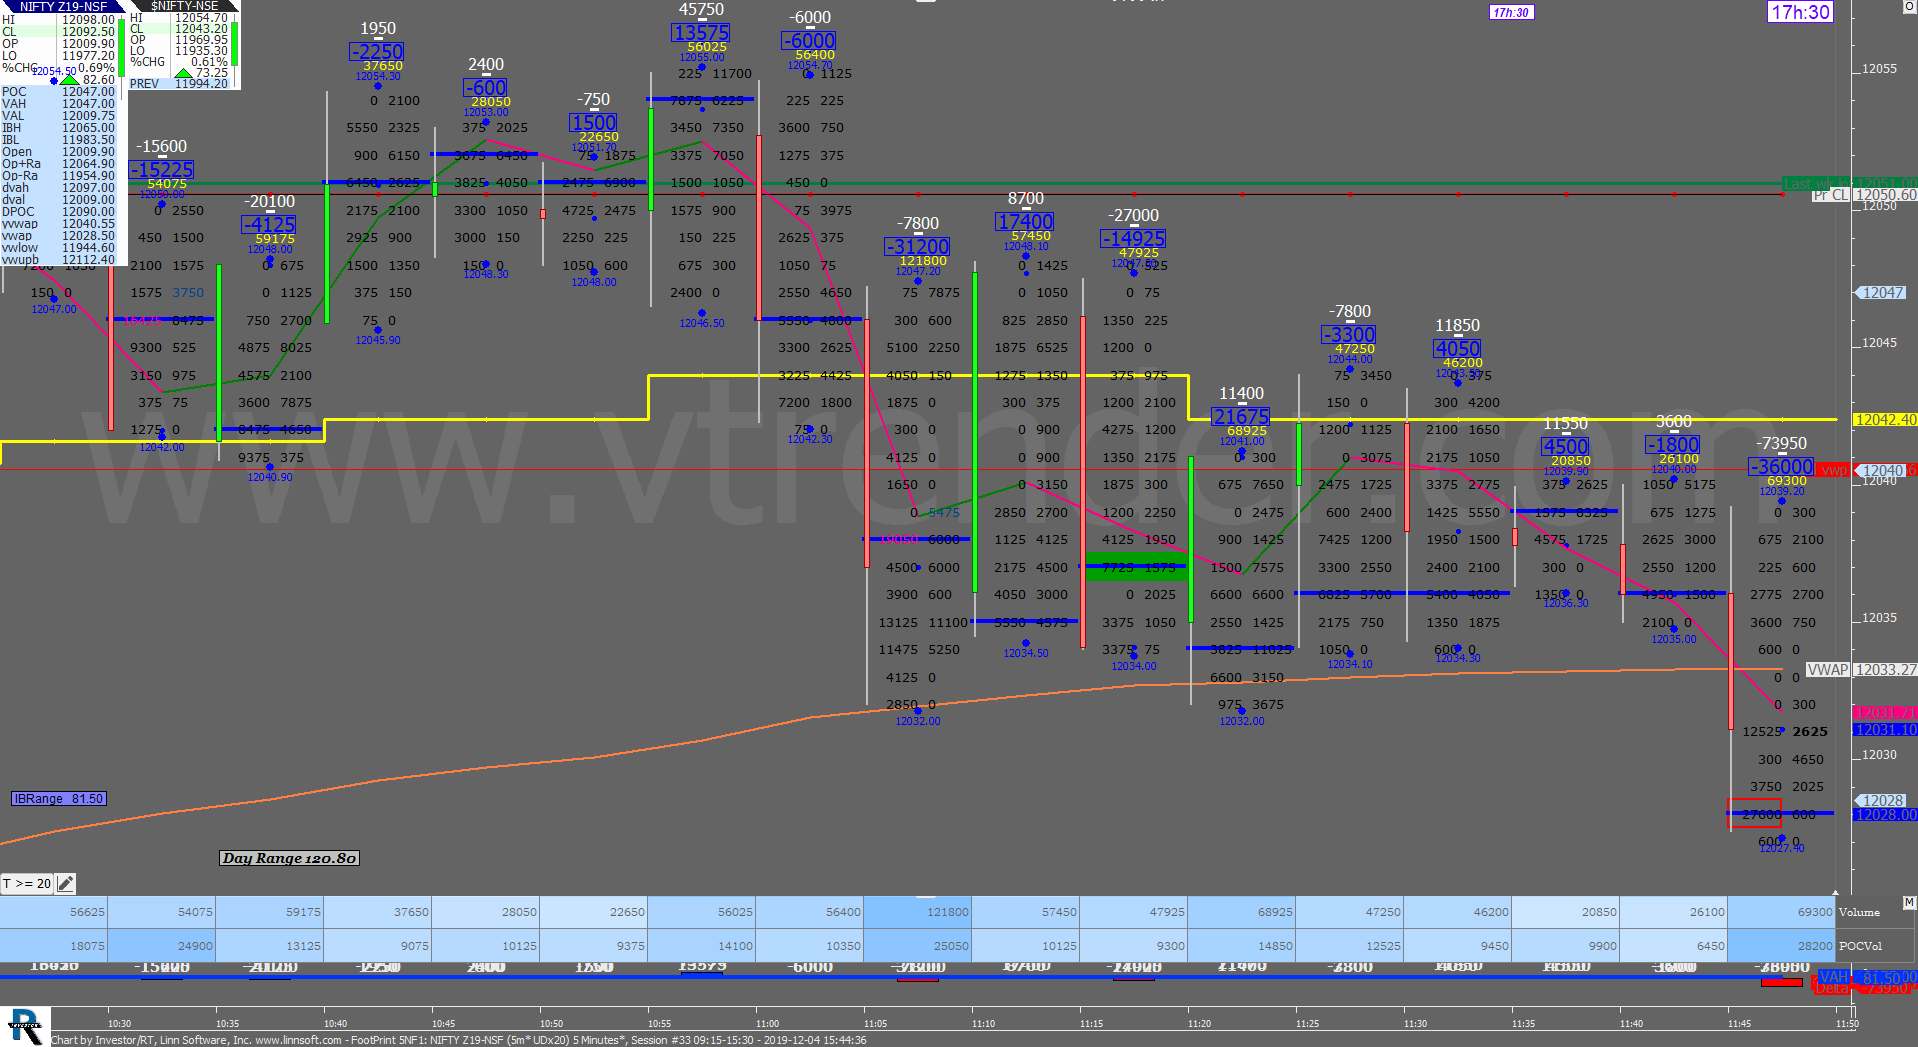 2 4 Order Flow Charts Dated 4Th Dec (5 Mins) Banknifty Futures, Day Trading, Intraday Trading, Intraday Trading Strategies, Nifty Futures, Order Flow Analysis, Support And Resistance, Trading Strategies, Volume Profile Trading